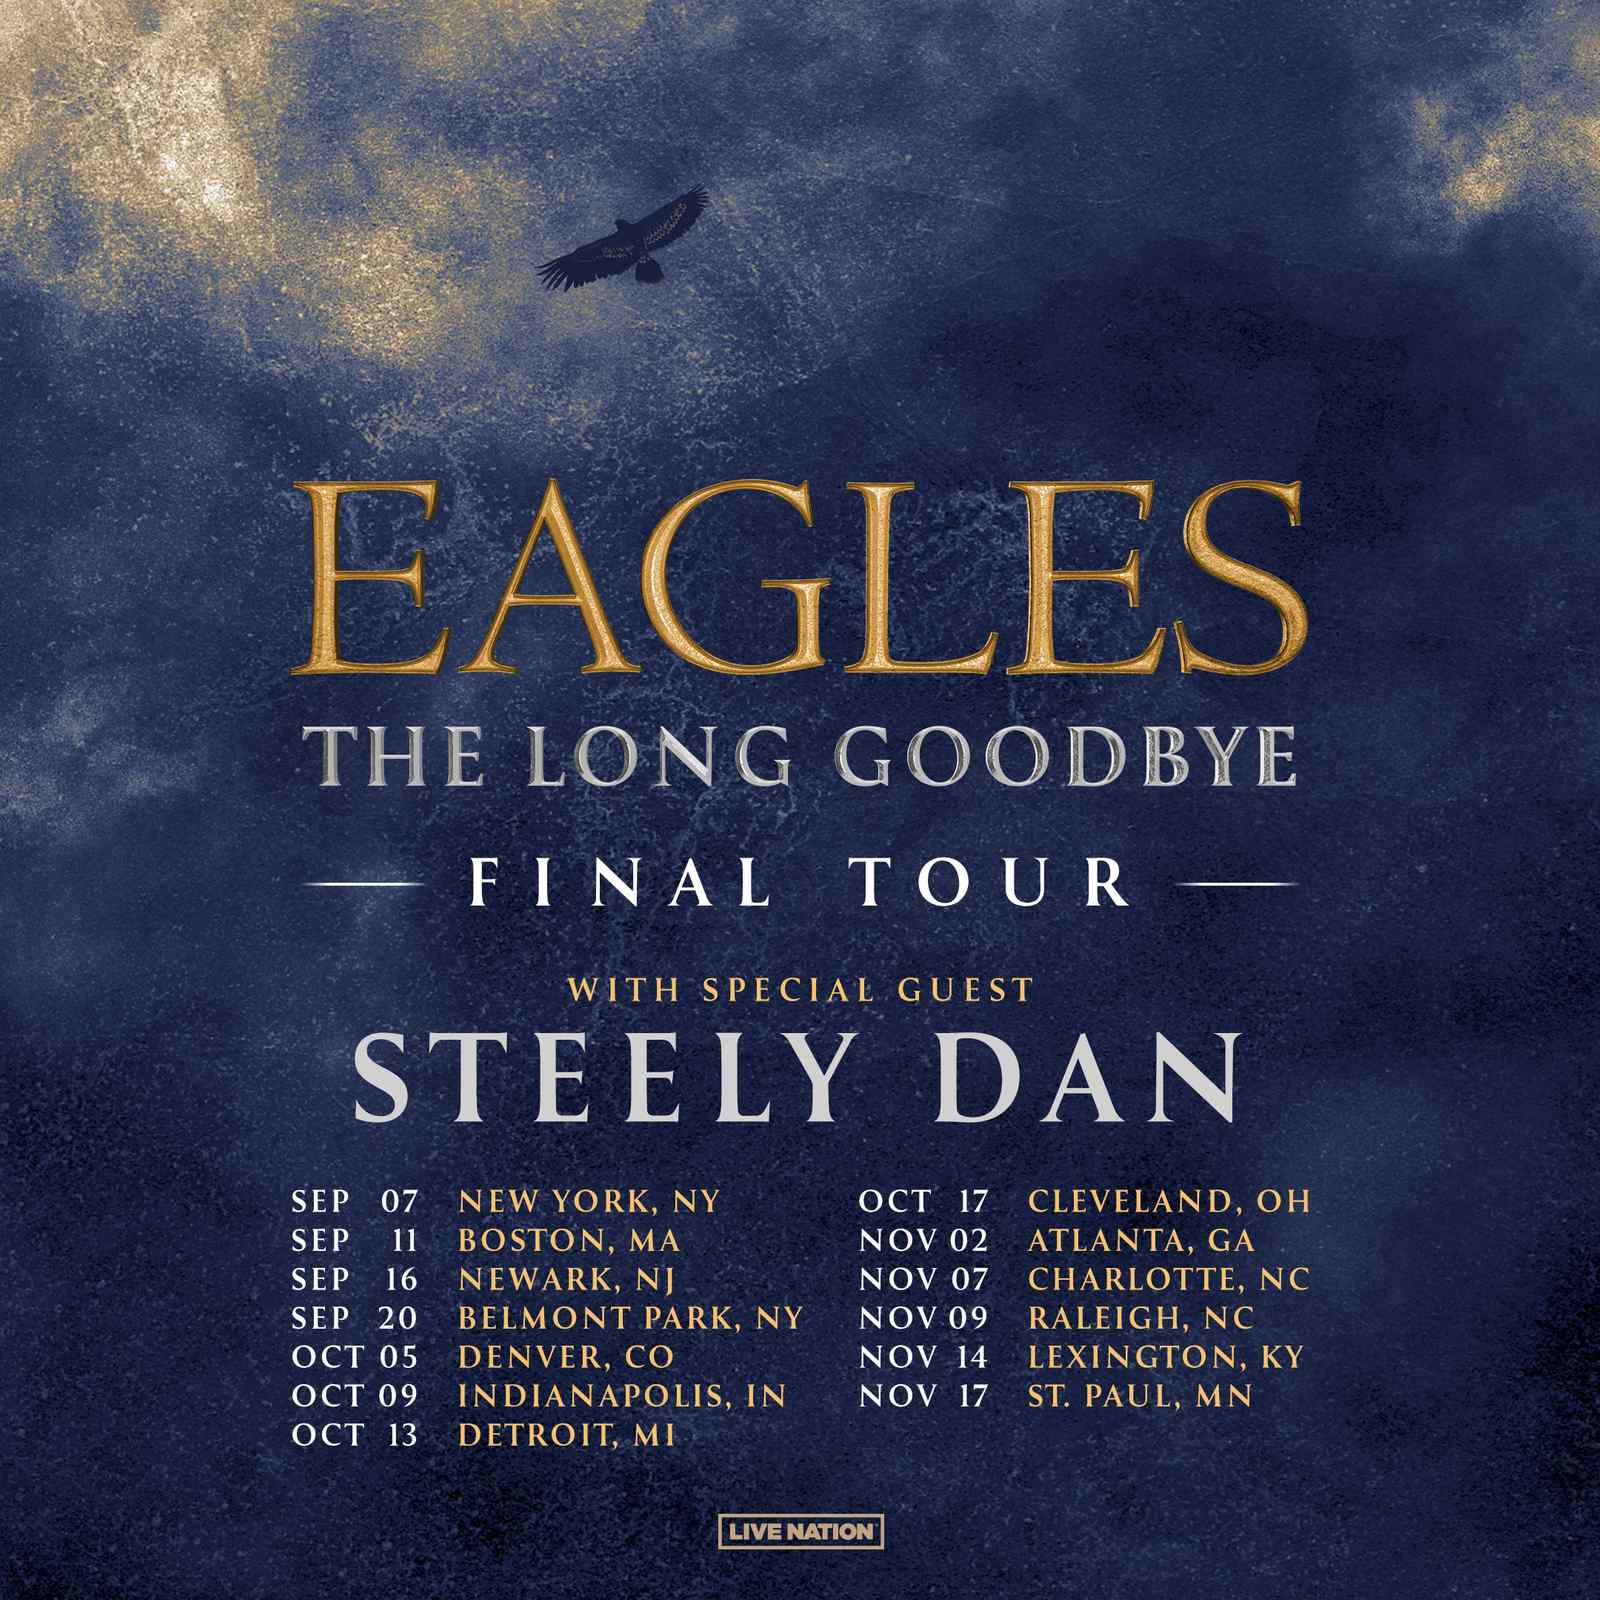 The Eagles Announce “The Long Goodbye” – The Band’s Final Tour